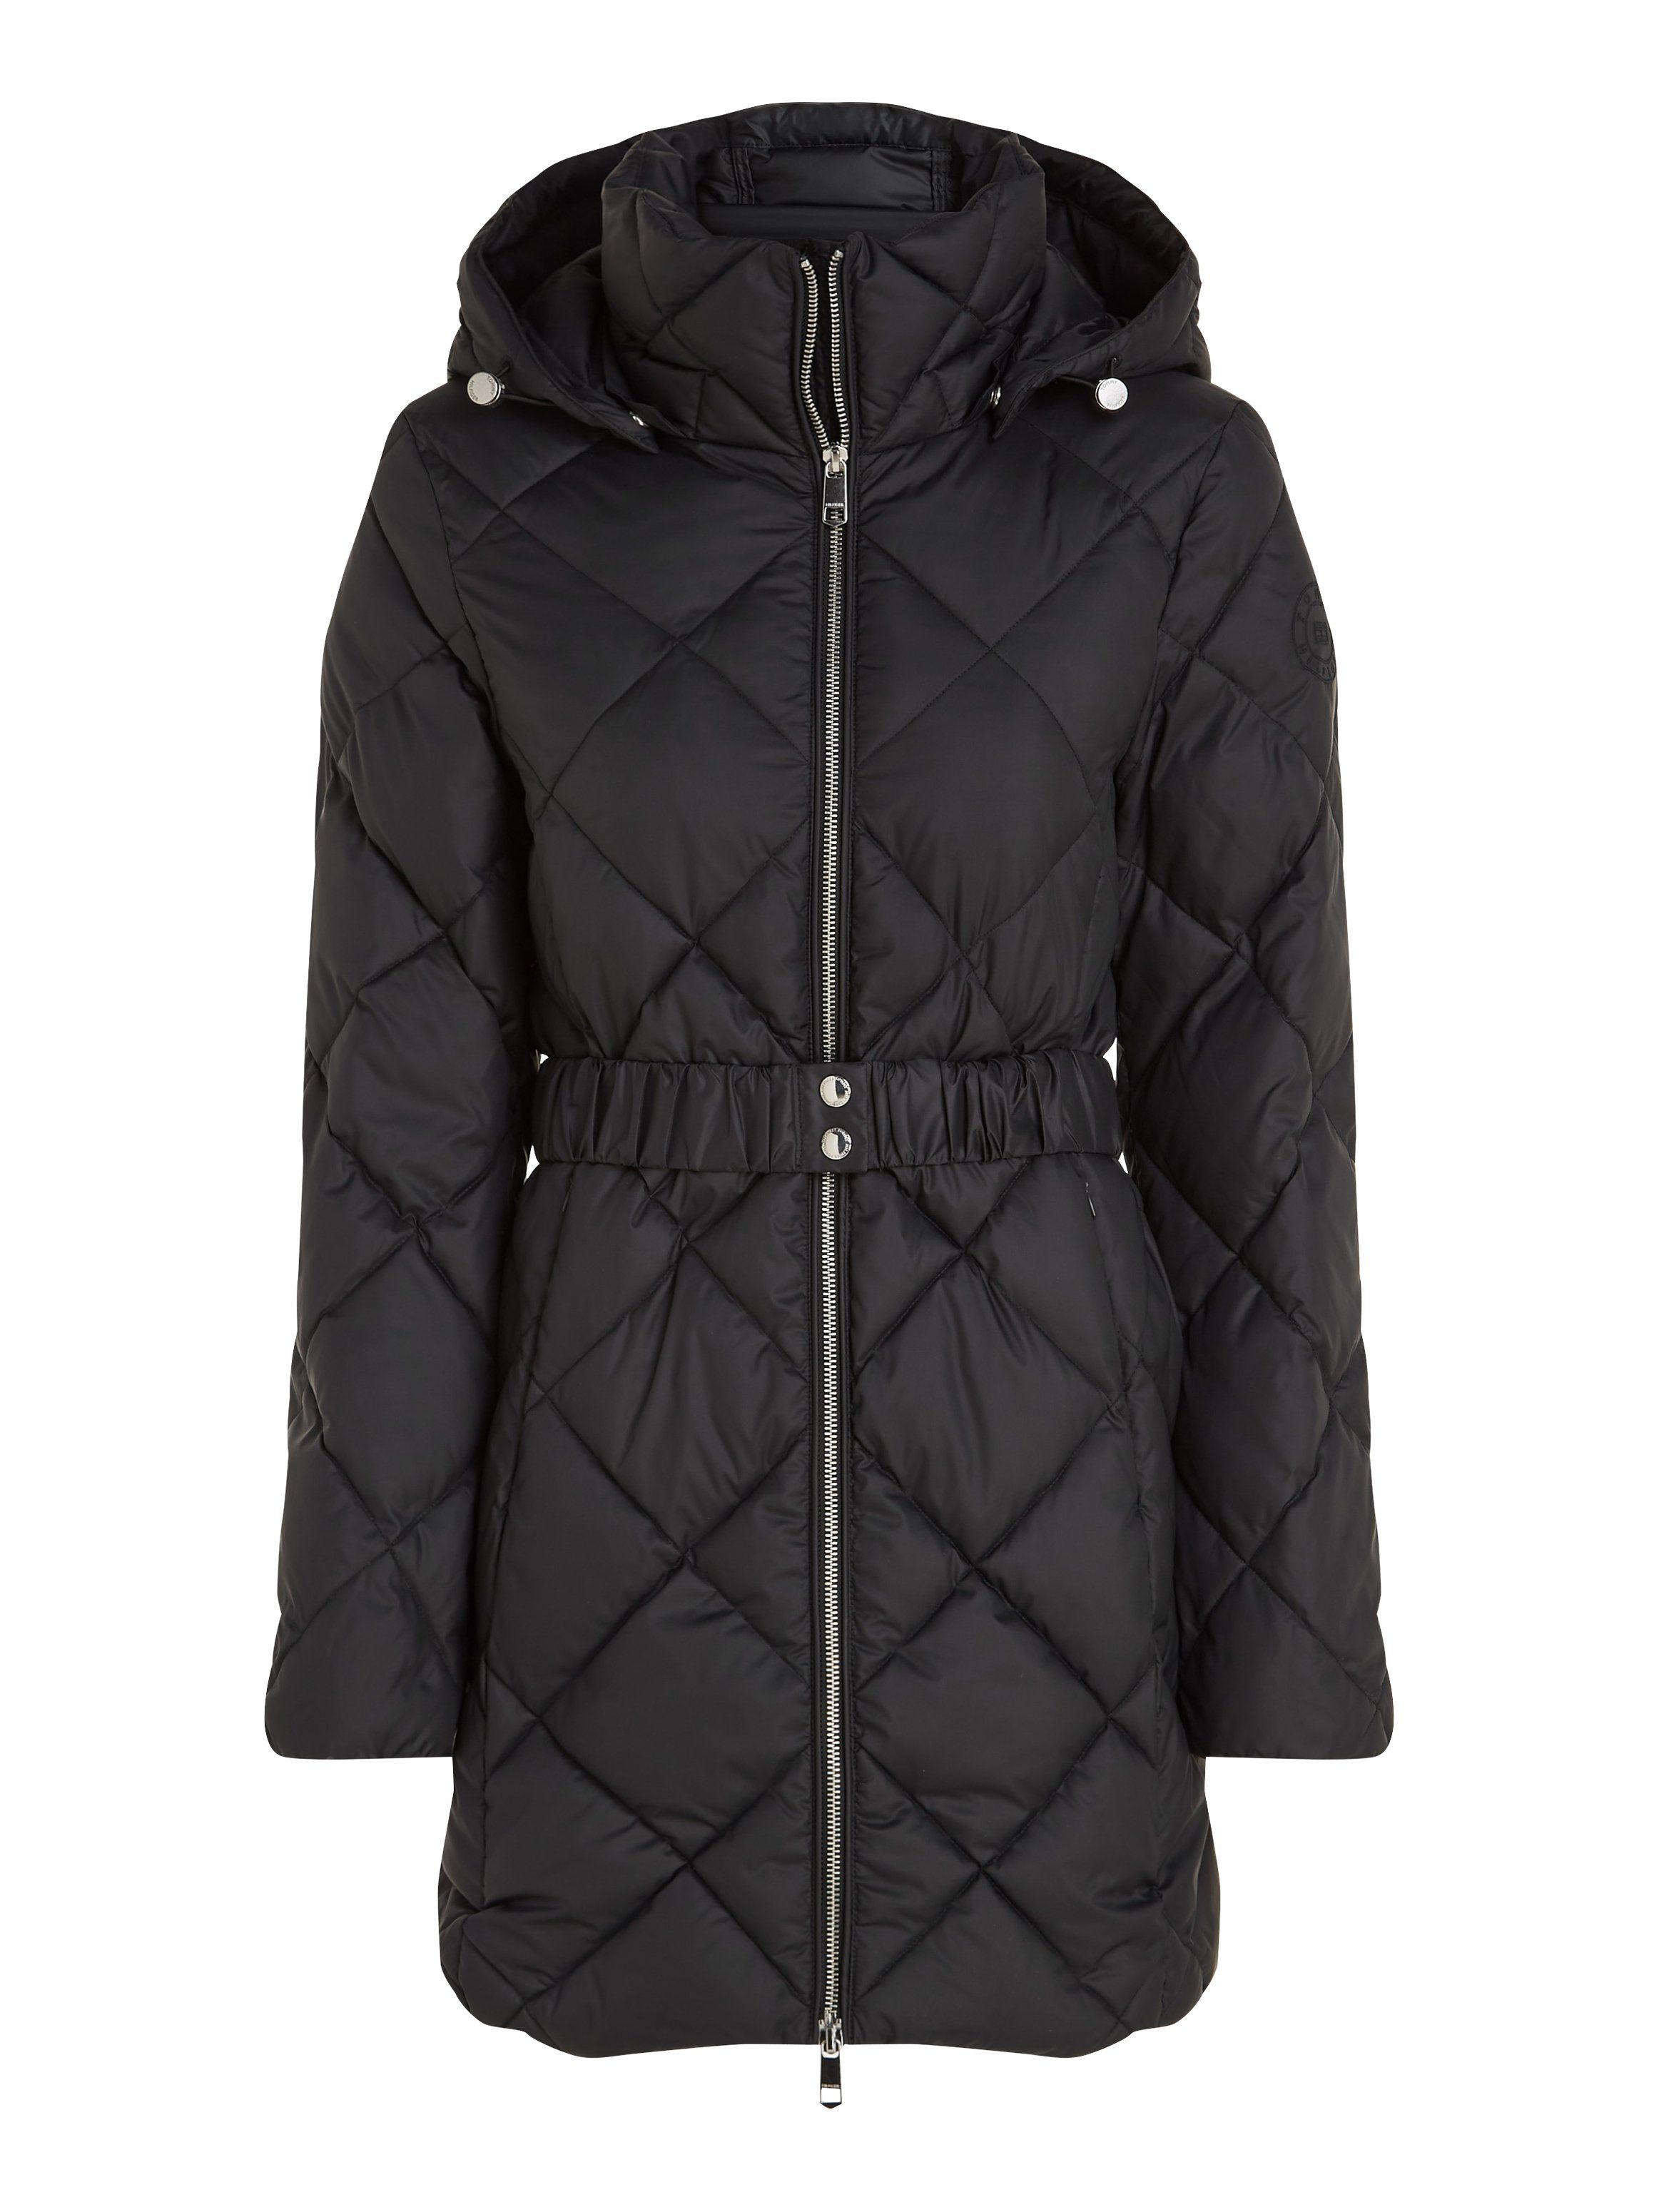 Steppmantel Kapuze Hilfiger QUILTED Tommy abnehmbarer BELTED ELEVATED COAT mit